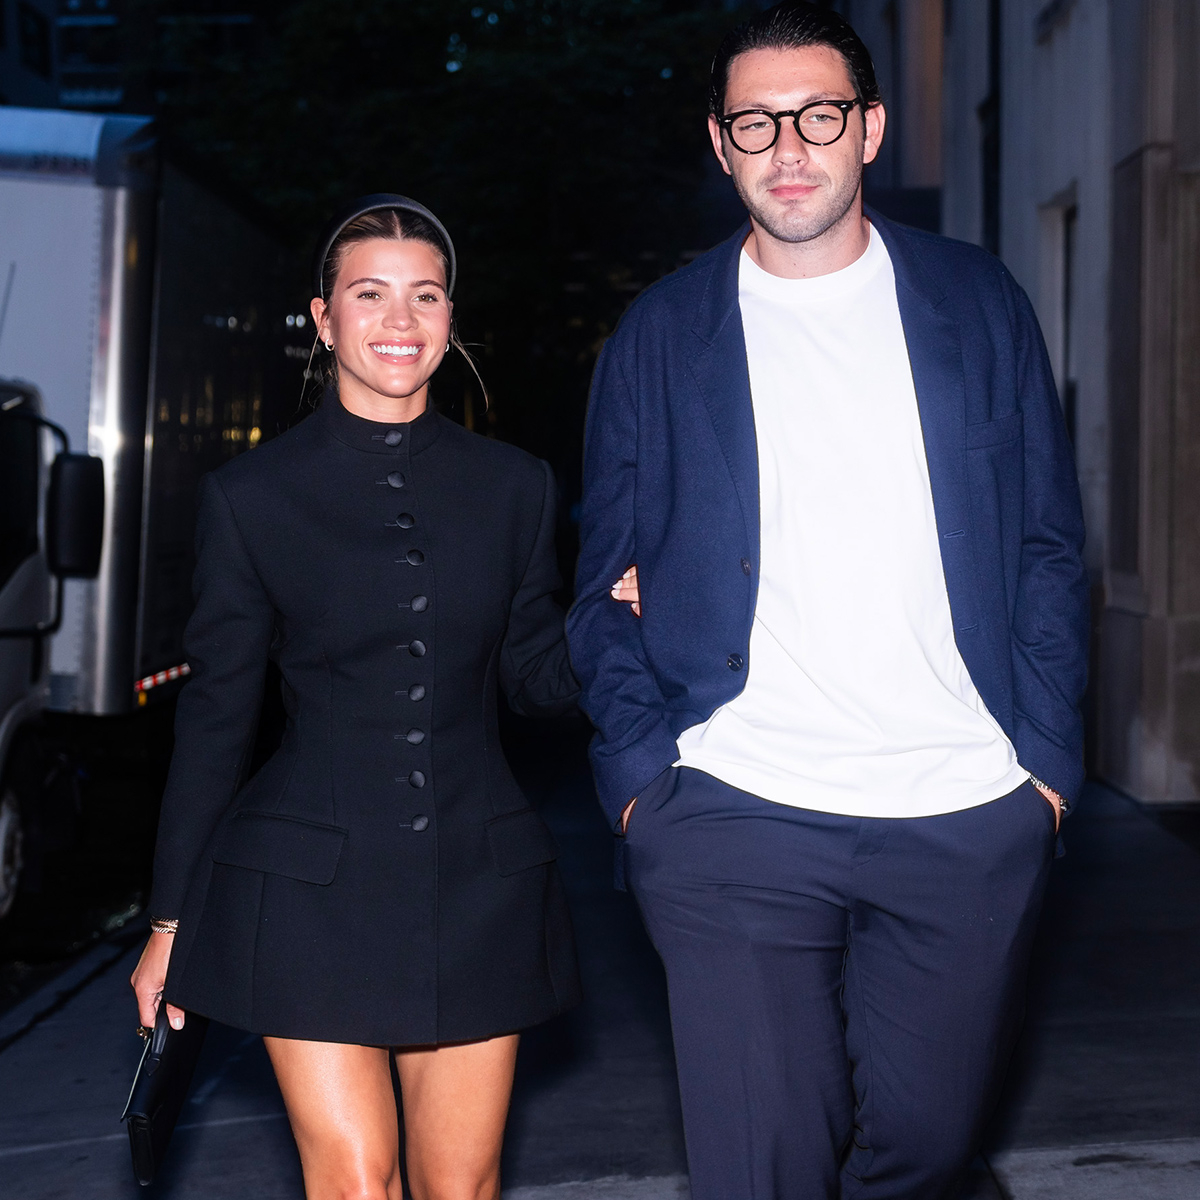 Sofia Richie News, Pictures, and Videos - E! Online